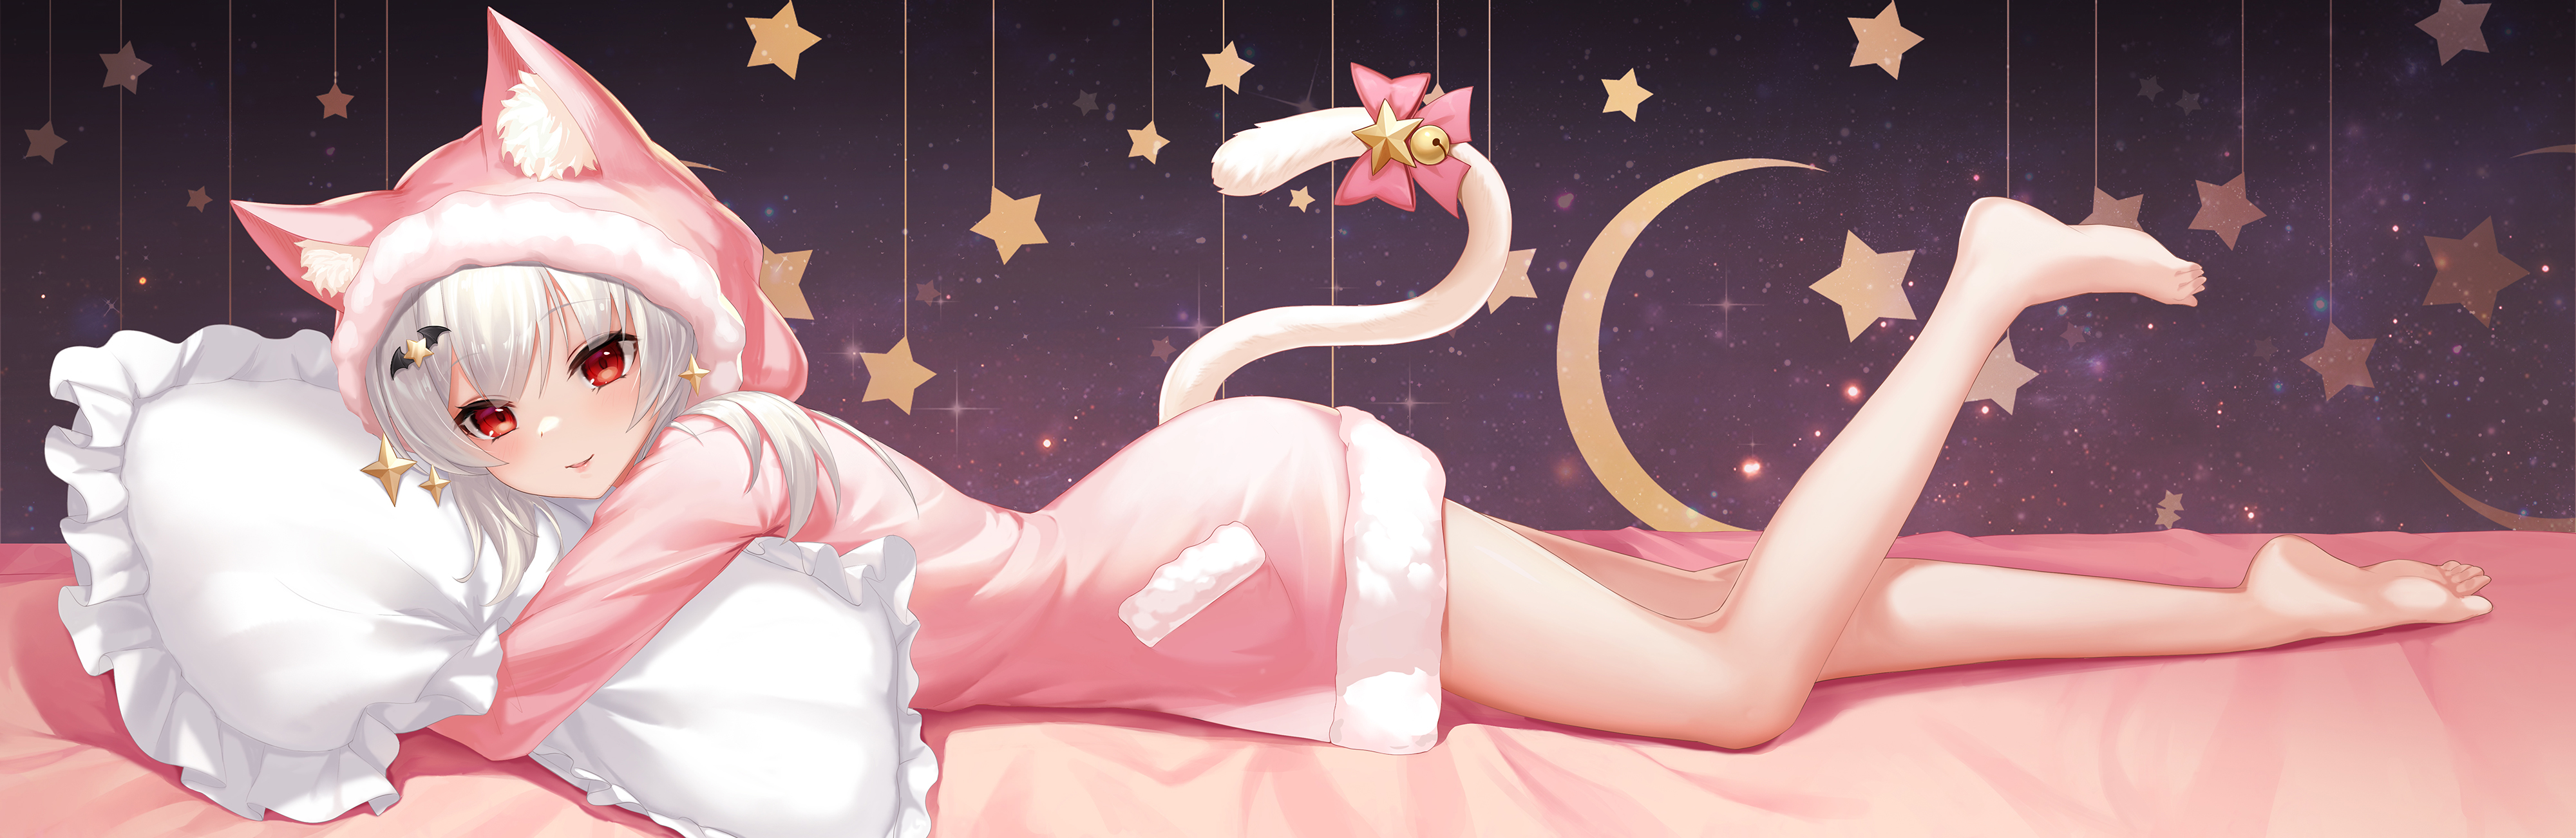 Anime Anime Girls Sramy Original Characters Animal Ears Cat Tail Legs Feet Red Eyes Silver Hair Bare 4000x1302